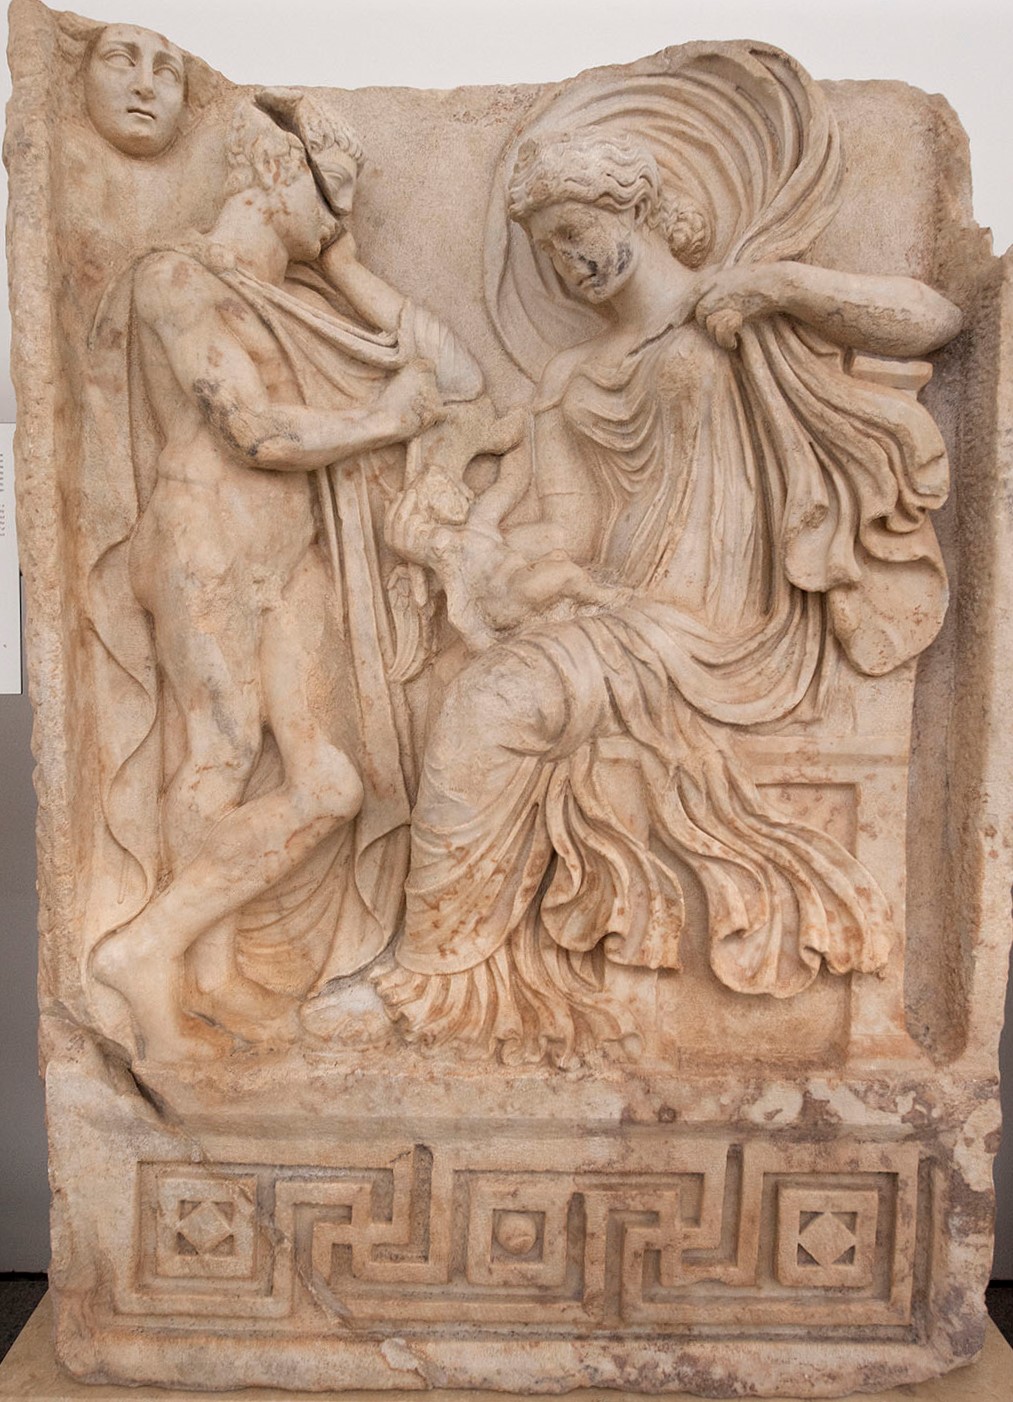 A relief of Aphrodite seated with a baby Aeneas on her lap, Anchises standing in front of her.